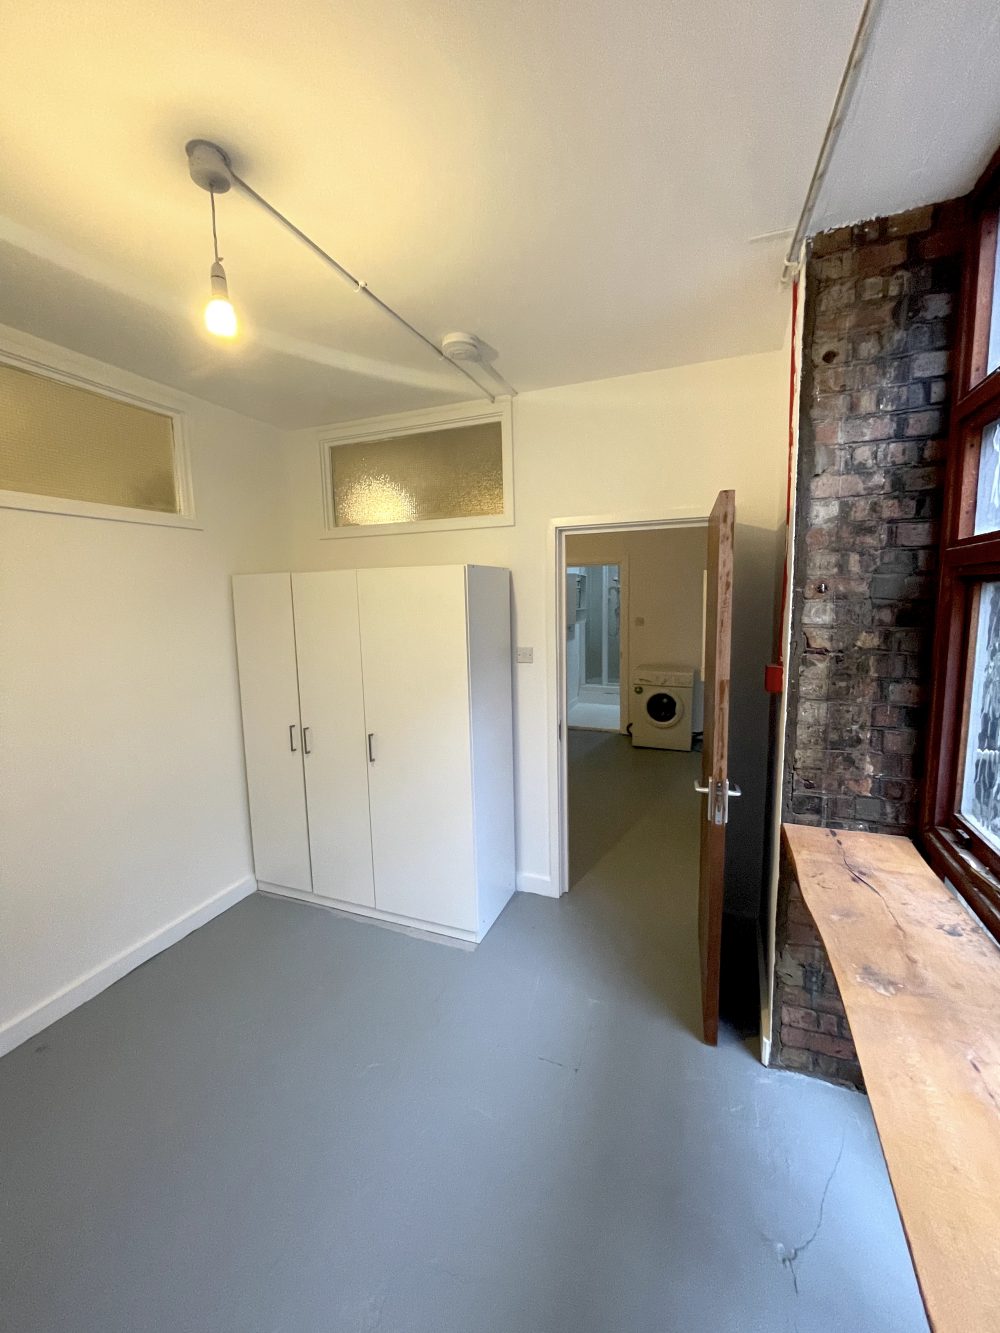 2 Bedroom Flat Available to rent in E9 London Fields Enterprise House Pic26